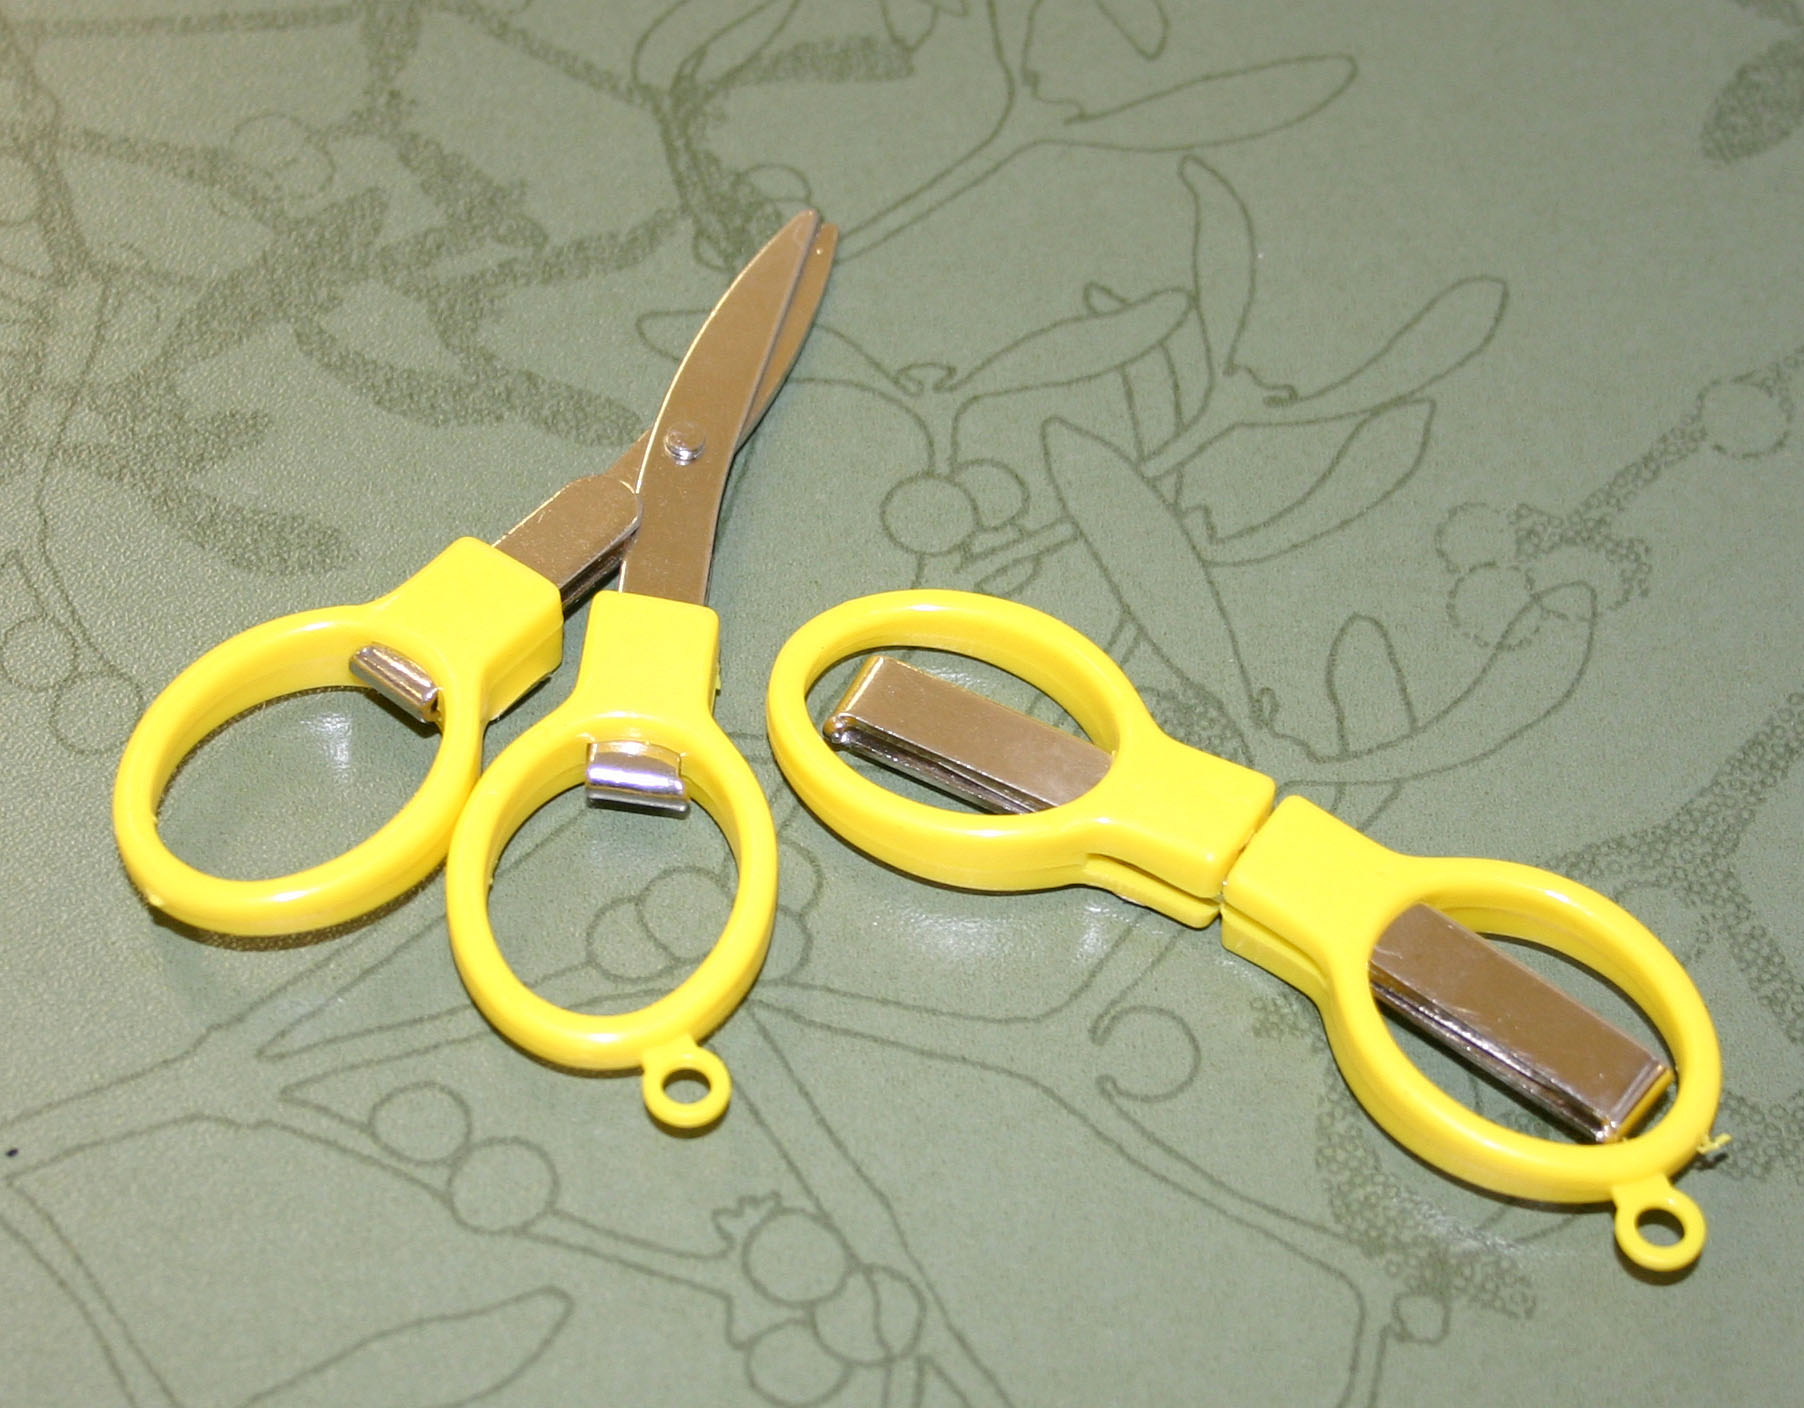 Folding Scissors 3 inch with Steel Blades and Plastic Handle